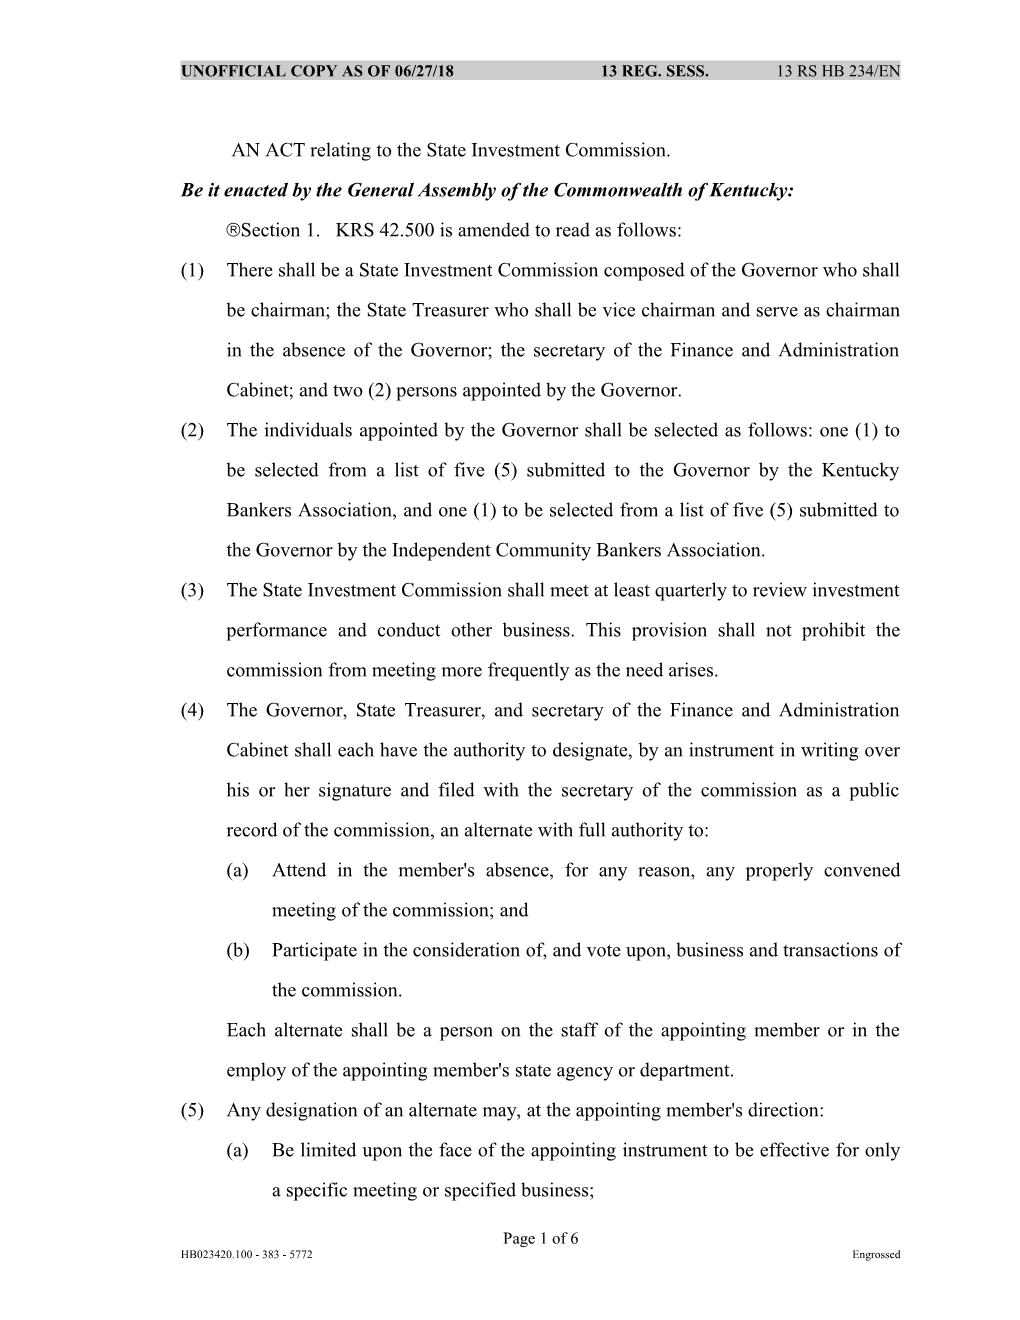 AN ACT Relating to the State Investment Commission